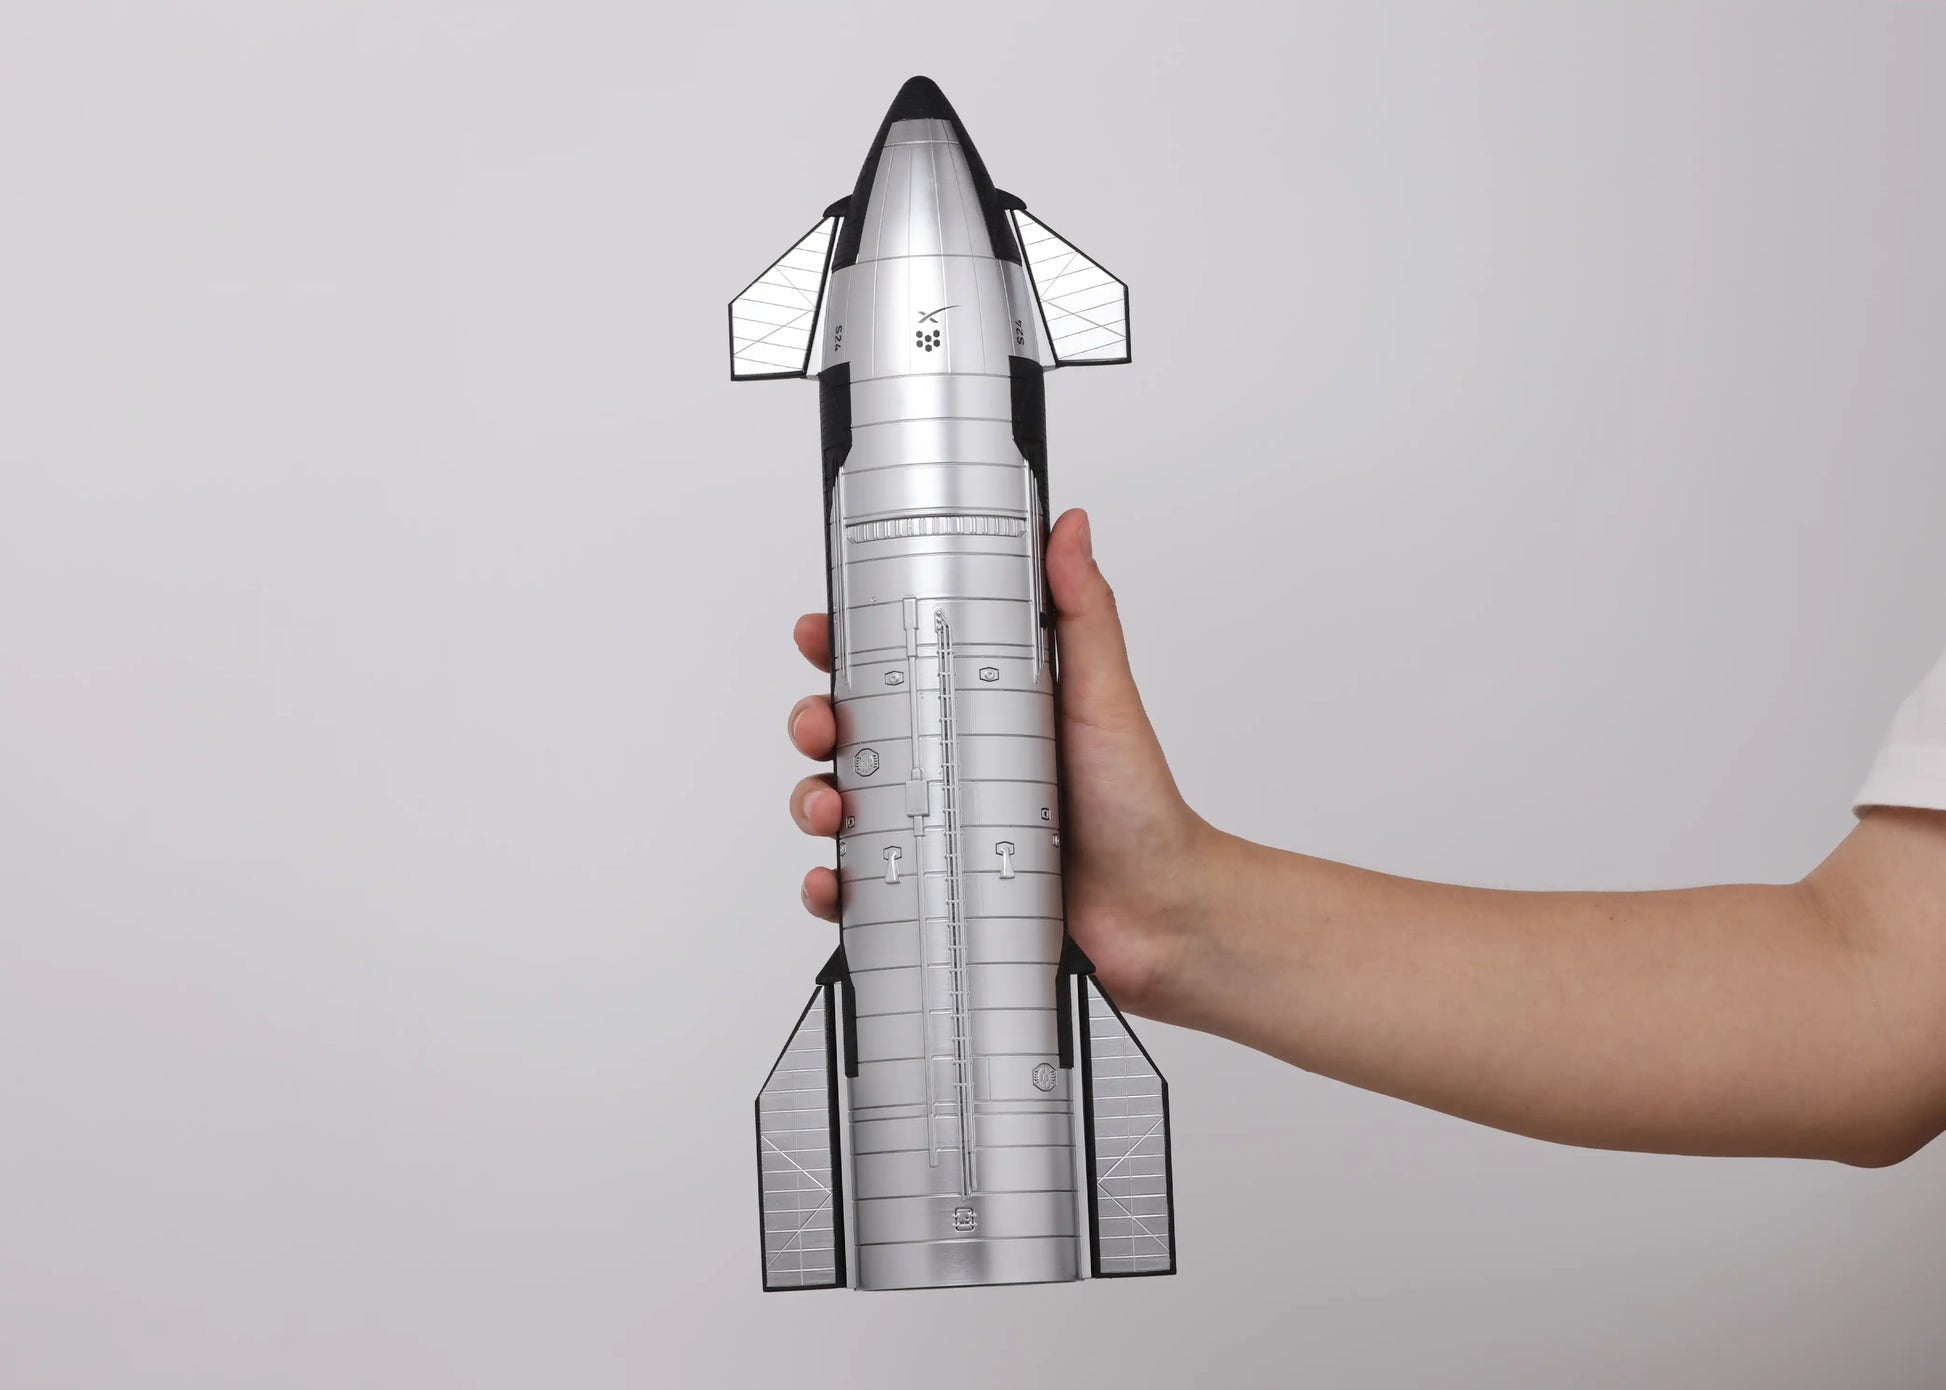 Scale of the Starship SN 24 model in a human hand